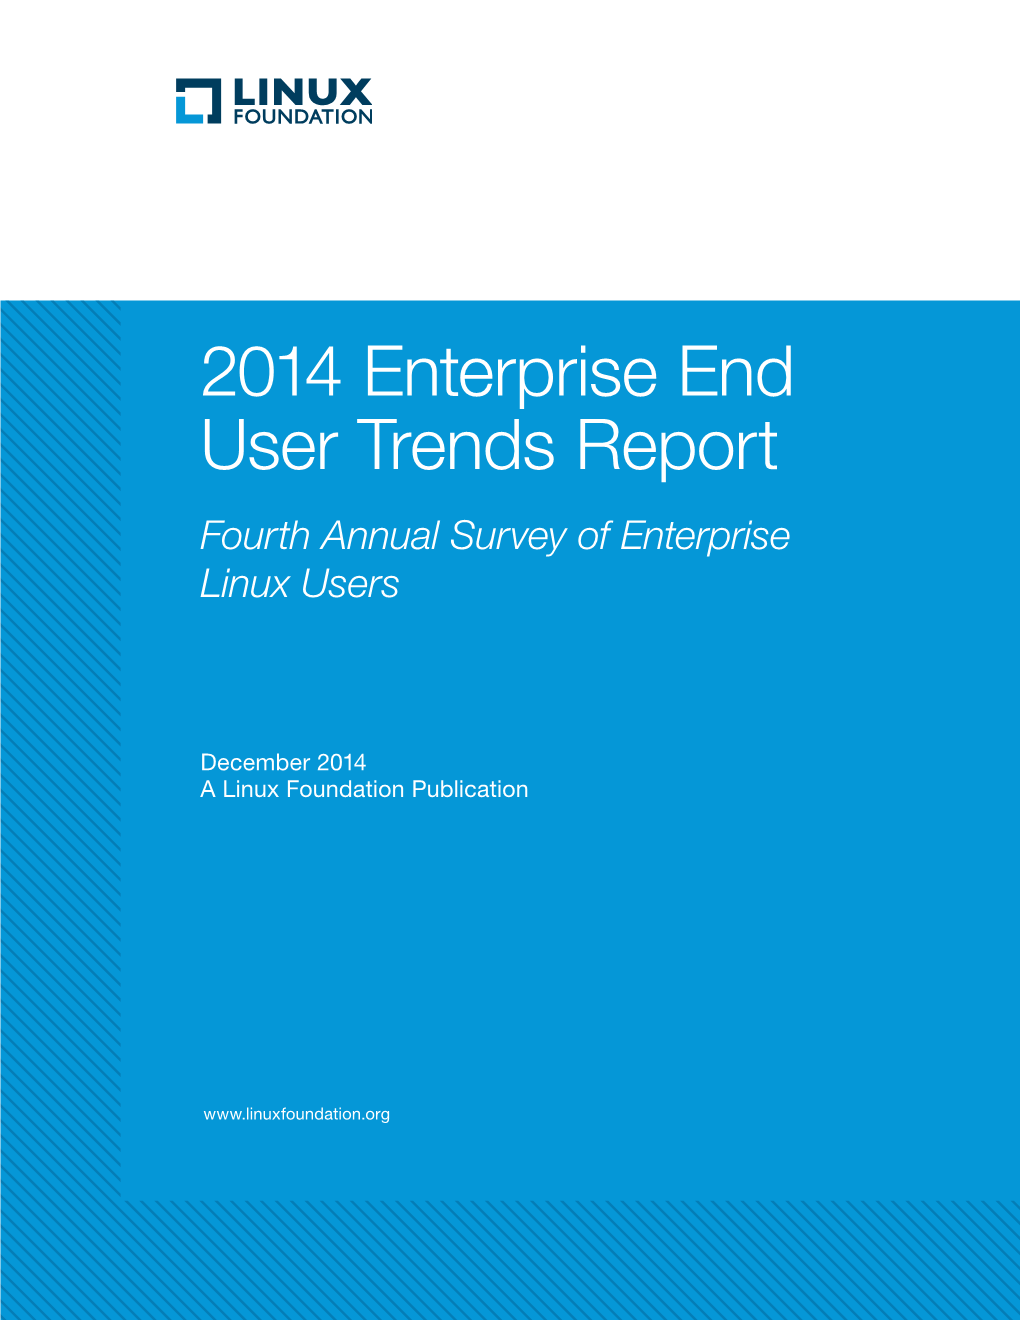 2014 Enterprise End User Trends Report Fourth Annual Survey of Enterprise Linux Users